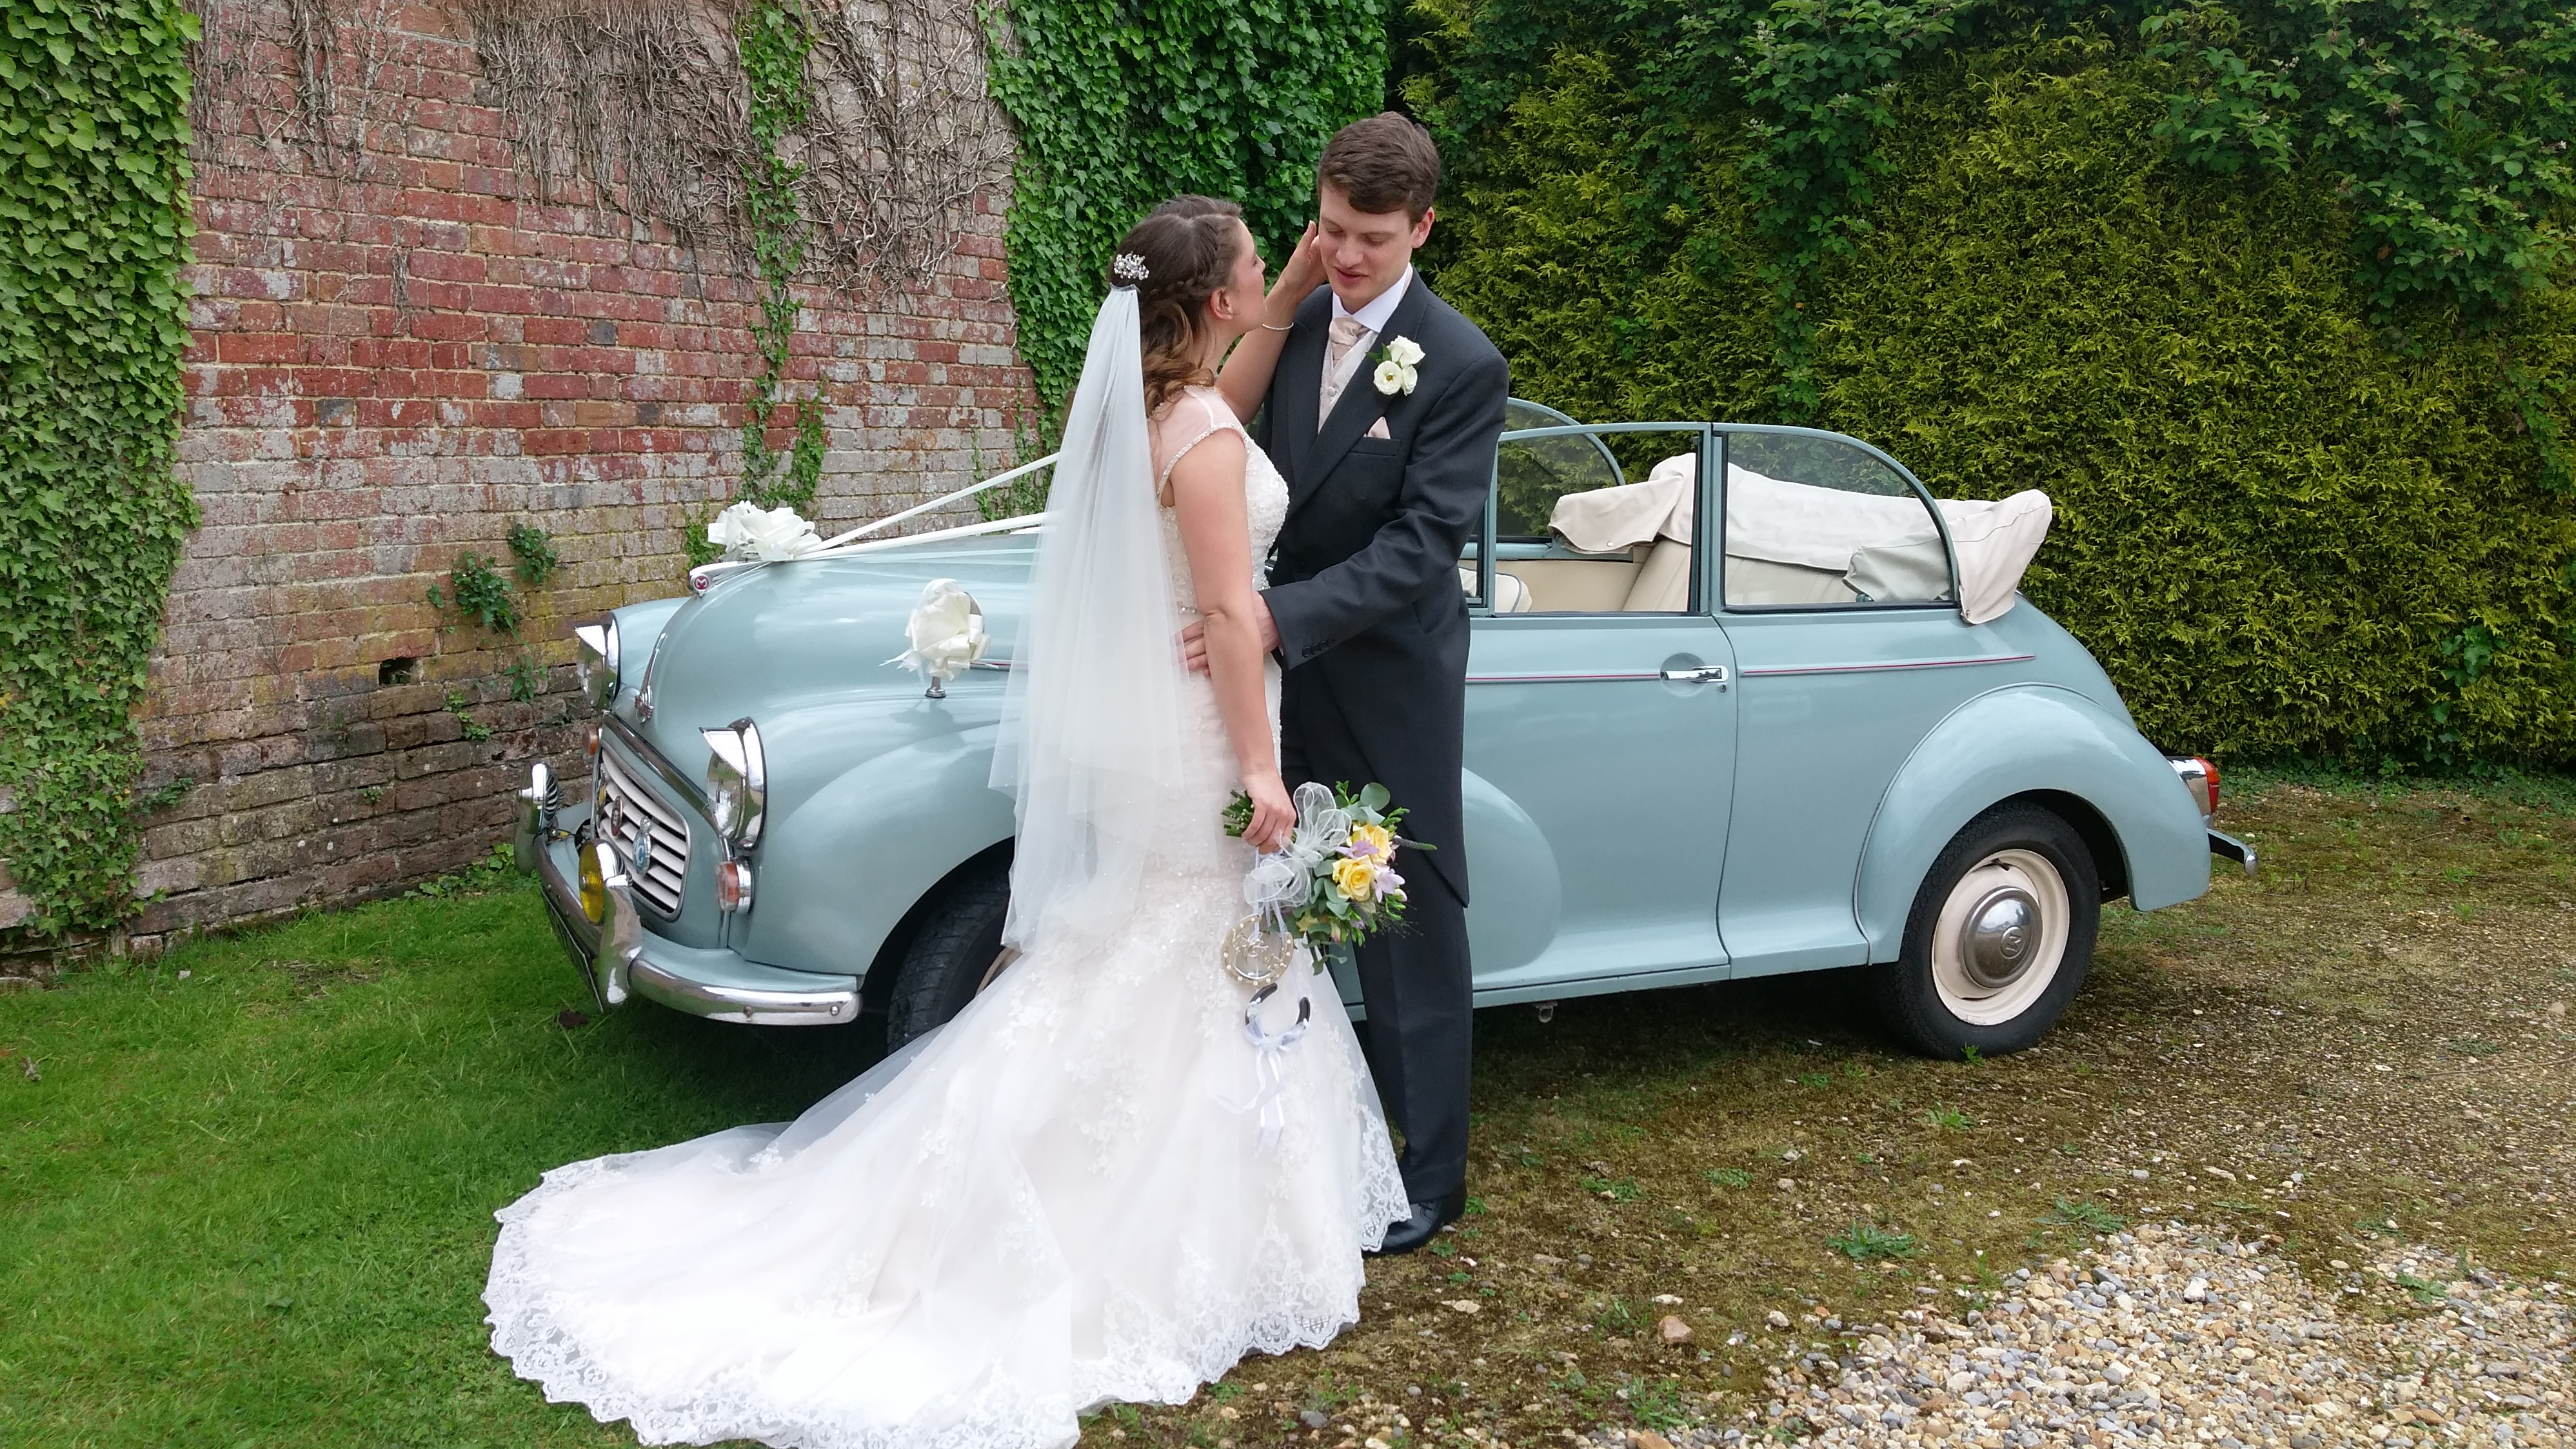 Lymington-based Classic Morris Minor with ribbons and bow in light blue with its roof open showing a light cream interior. Bride and Groom are in front of the vehicle posing for their wedding photographer.